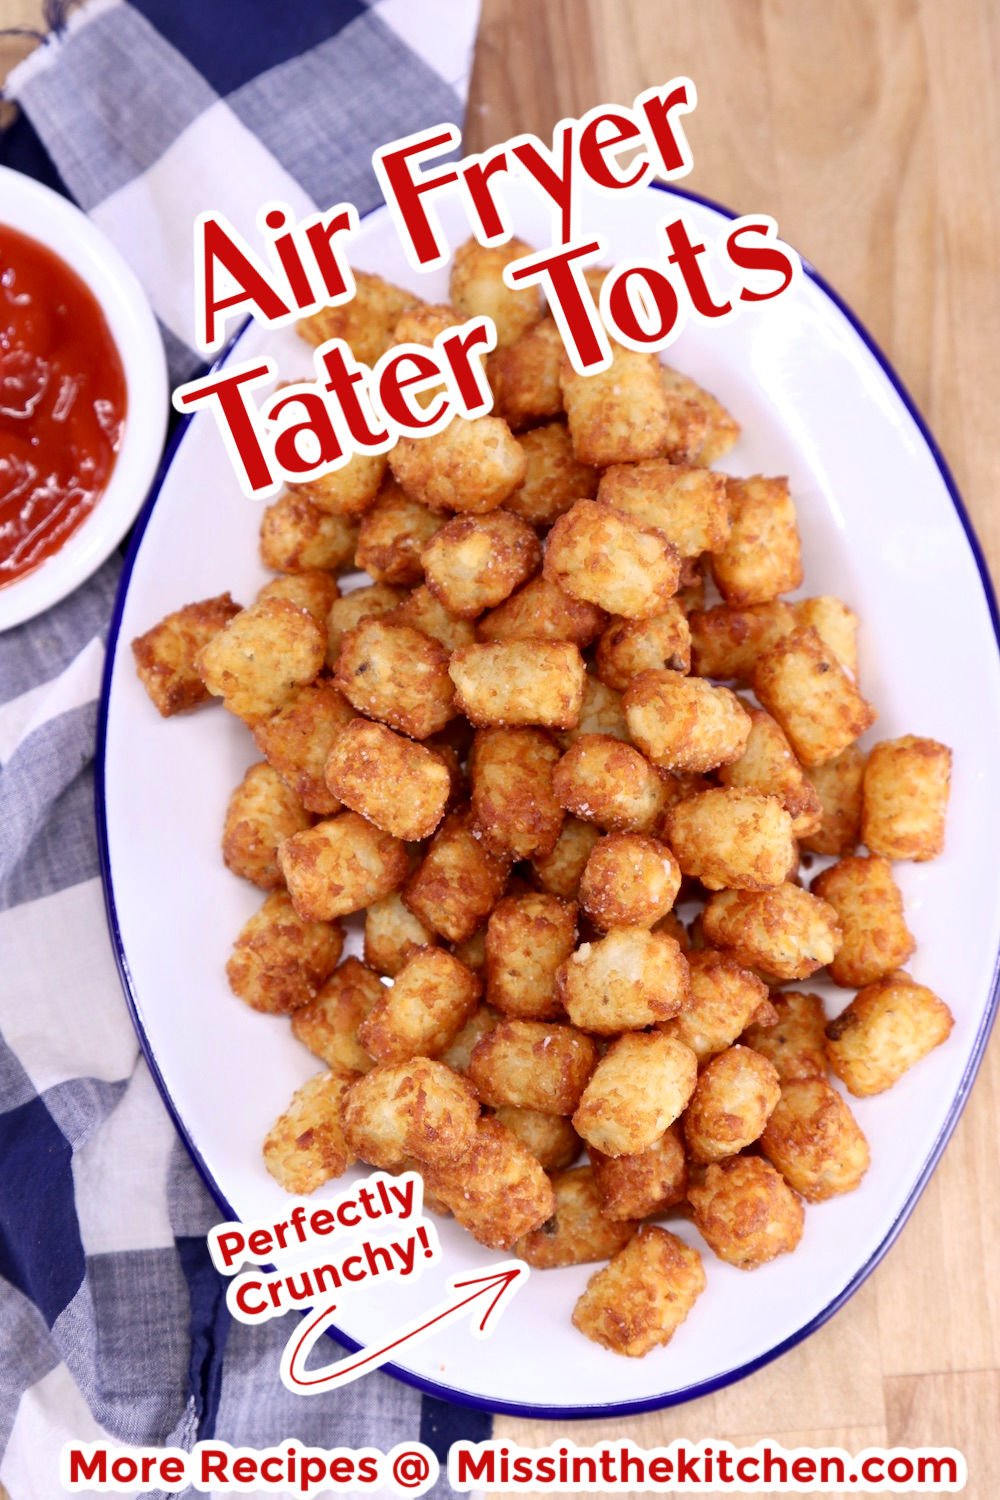 Platter of tater tots with text overlay